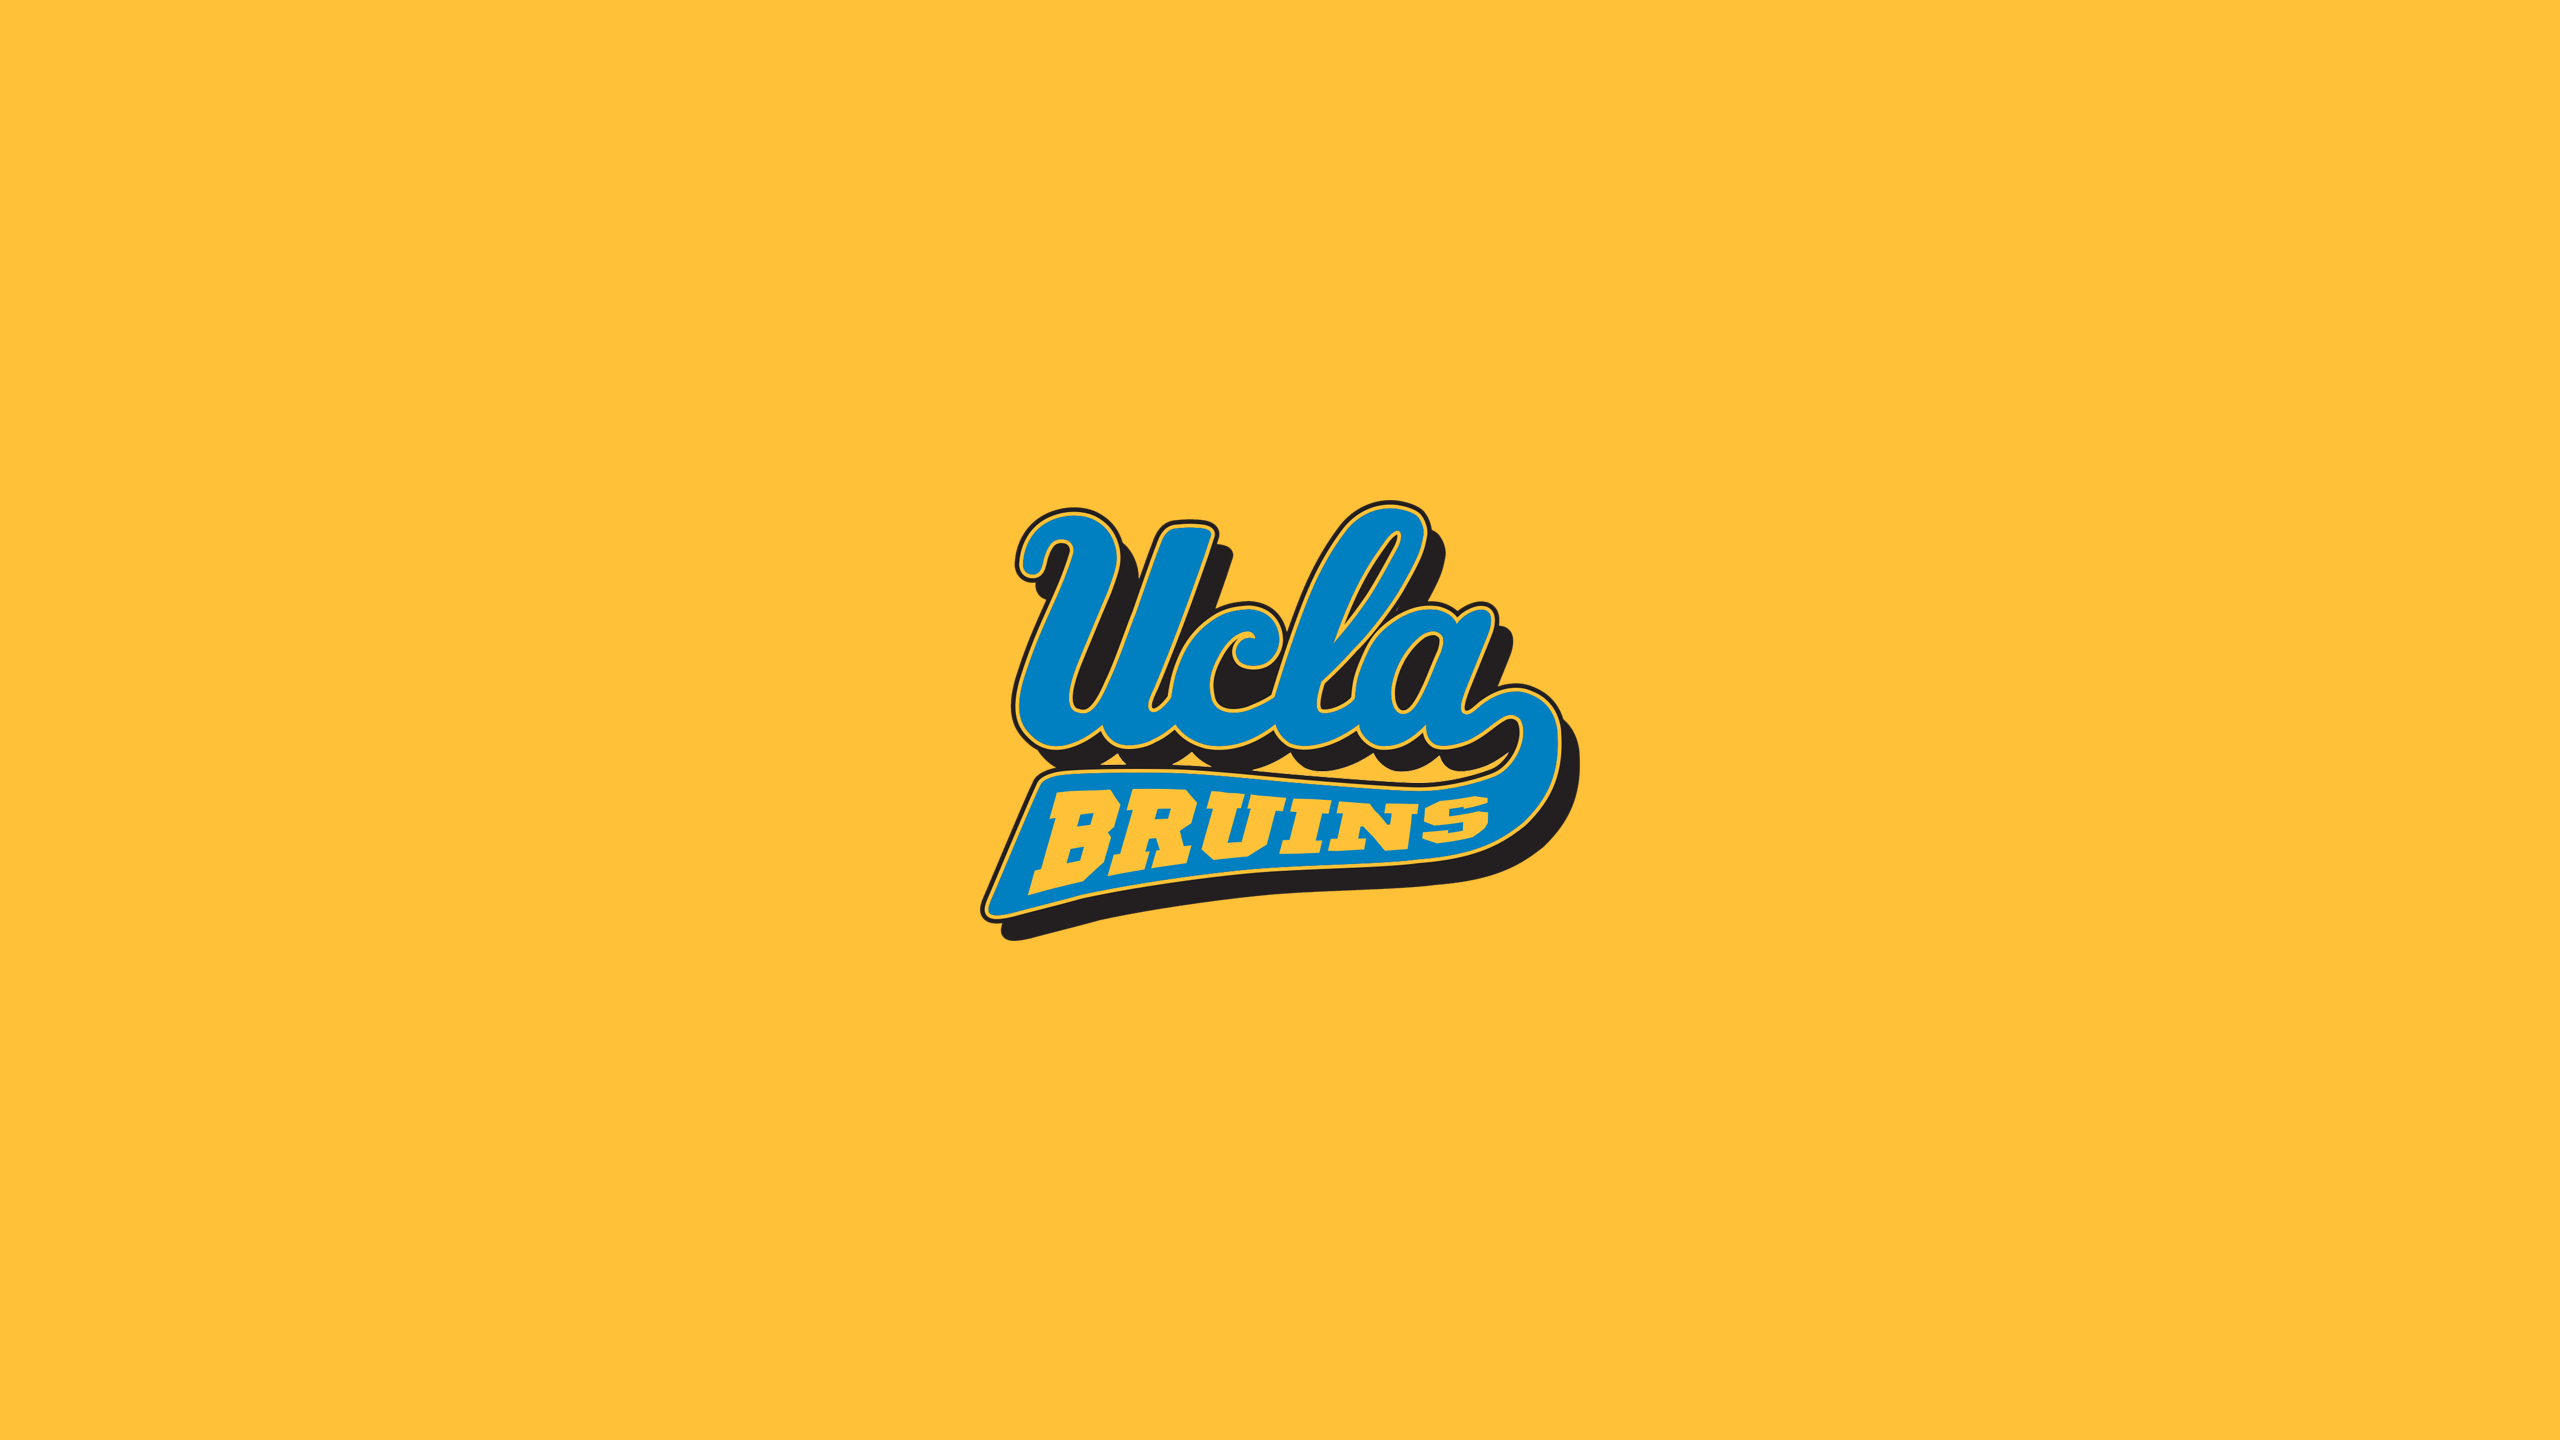 UCLA Bruins - NCAAF - Square Bettor